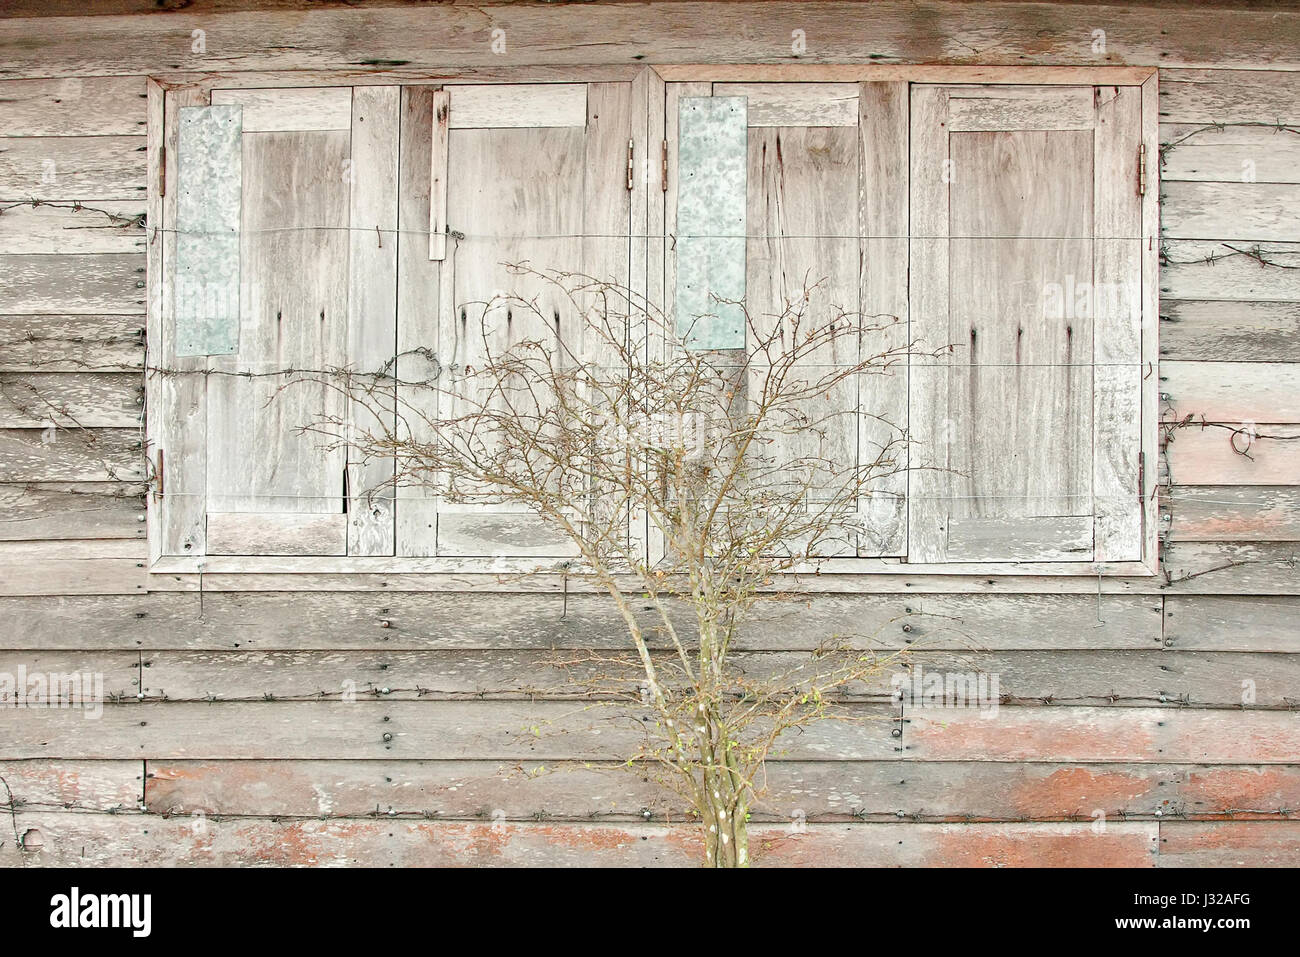 The old wood wall and close window with tree Stock Photo